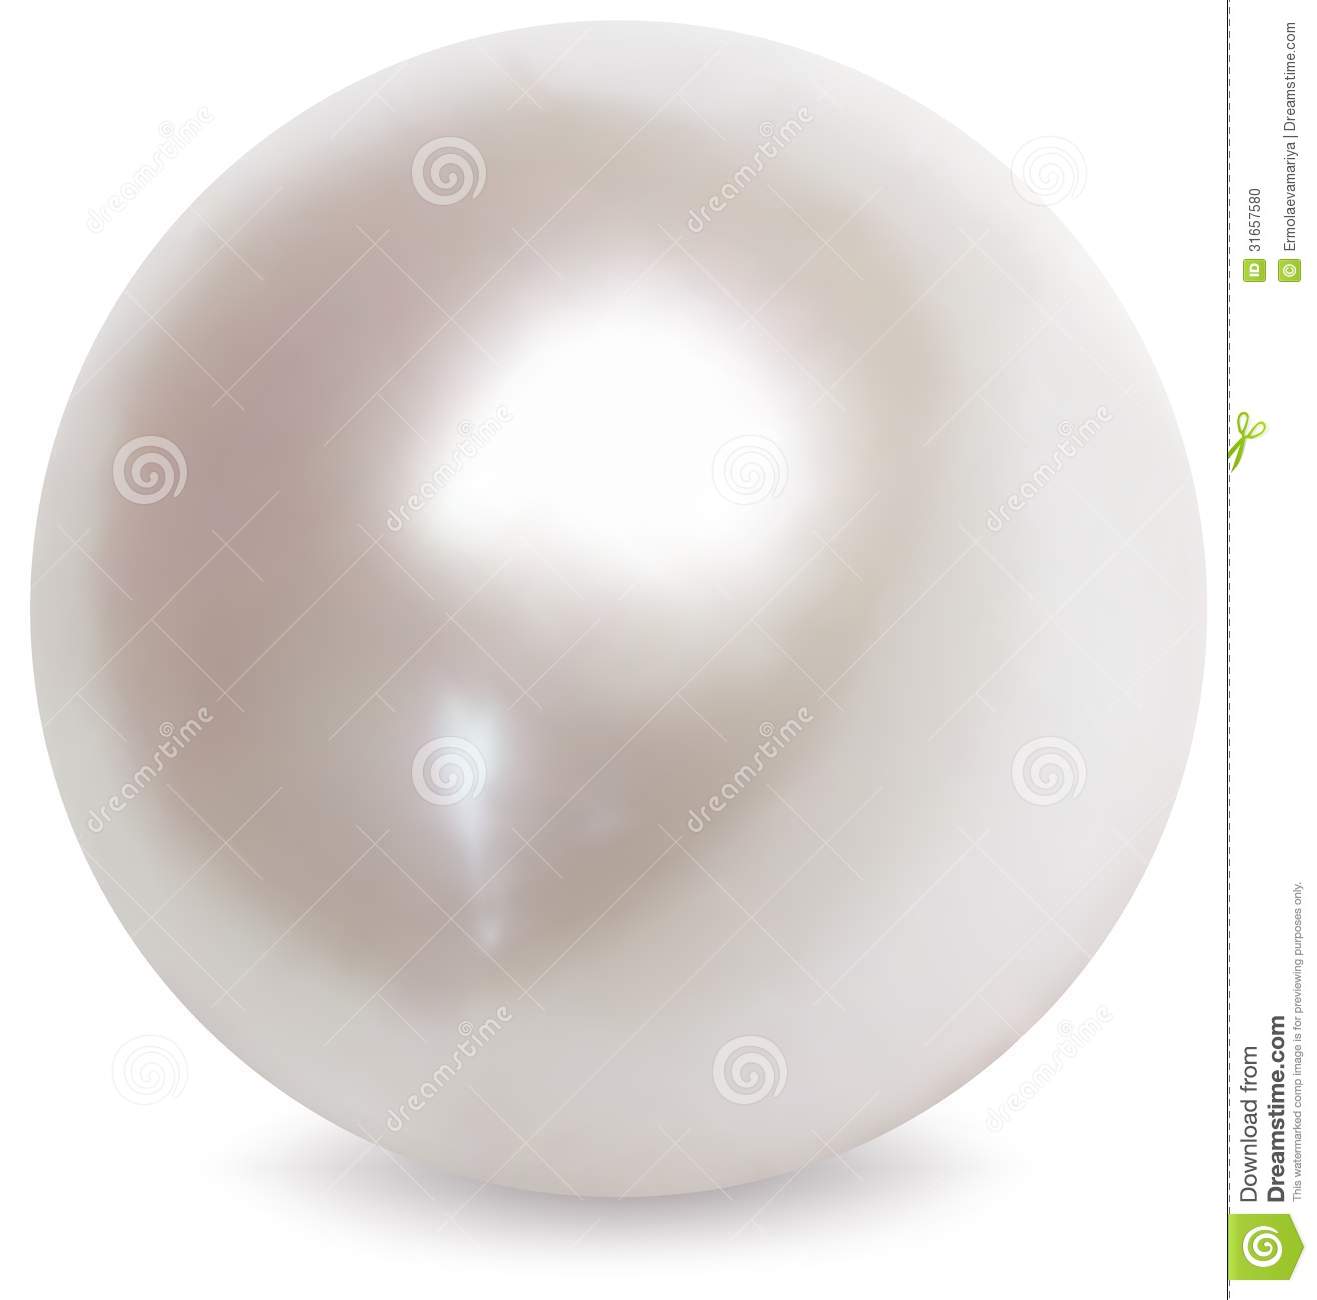 For White Pearls Clipart Displaying 19 Images For White Pearls Clipart